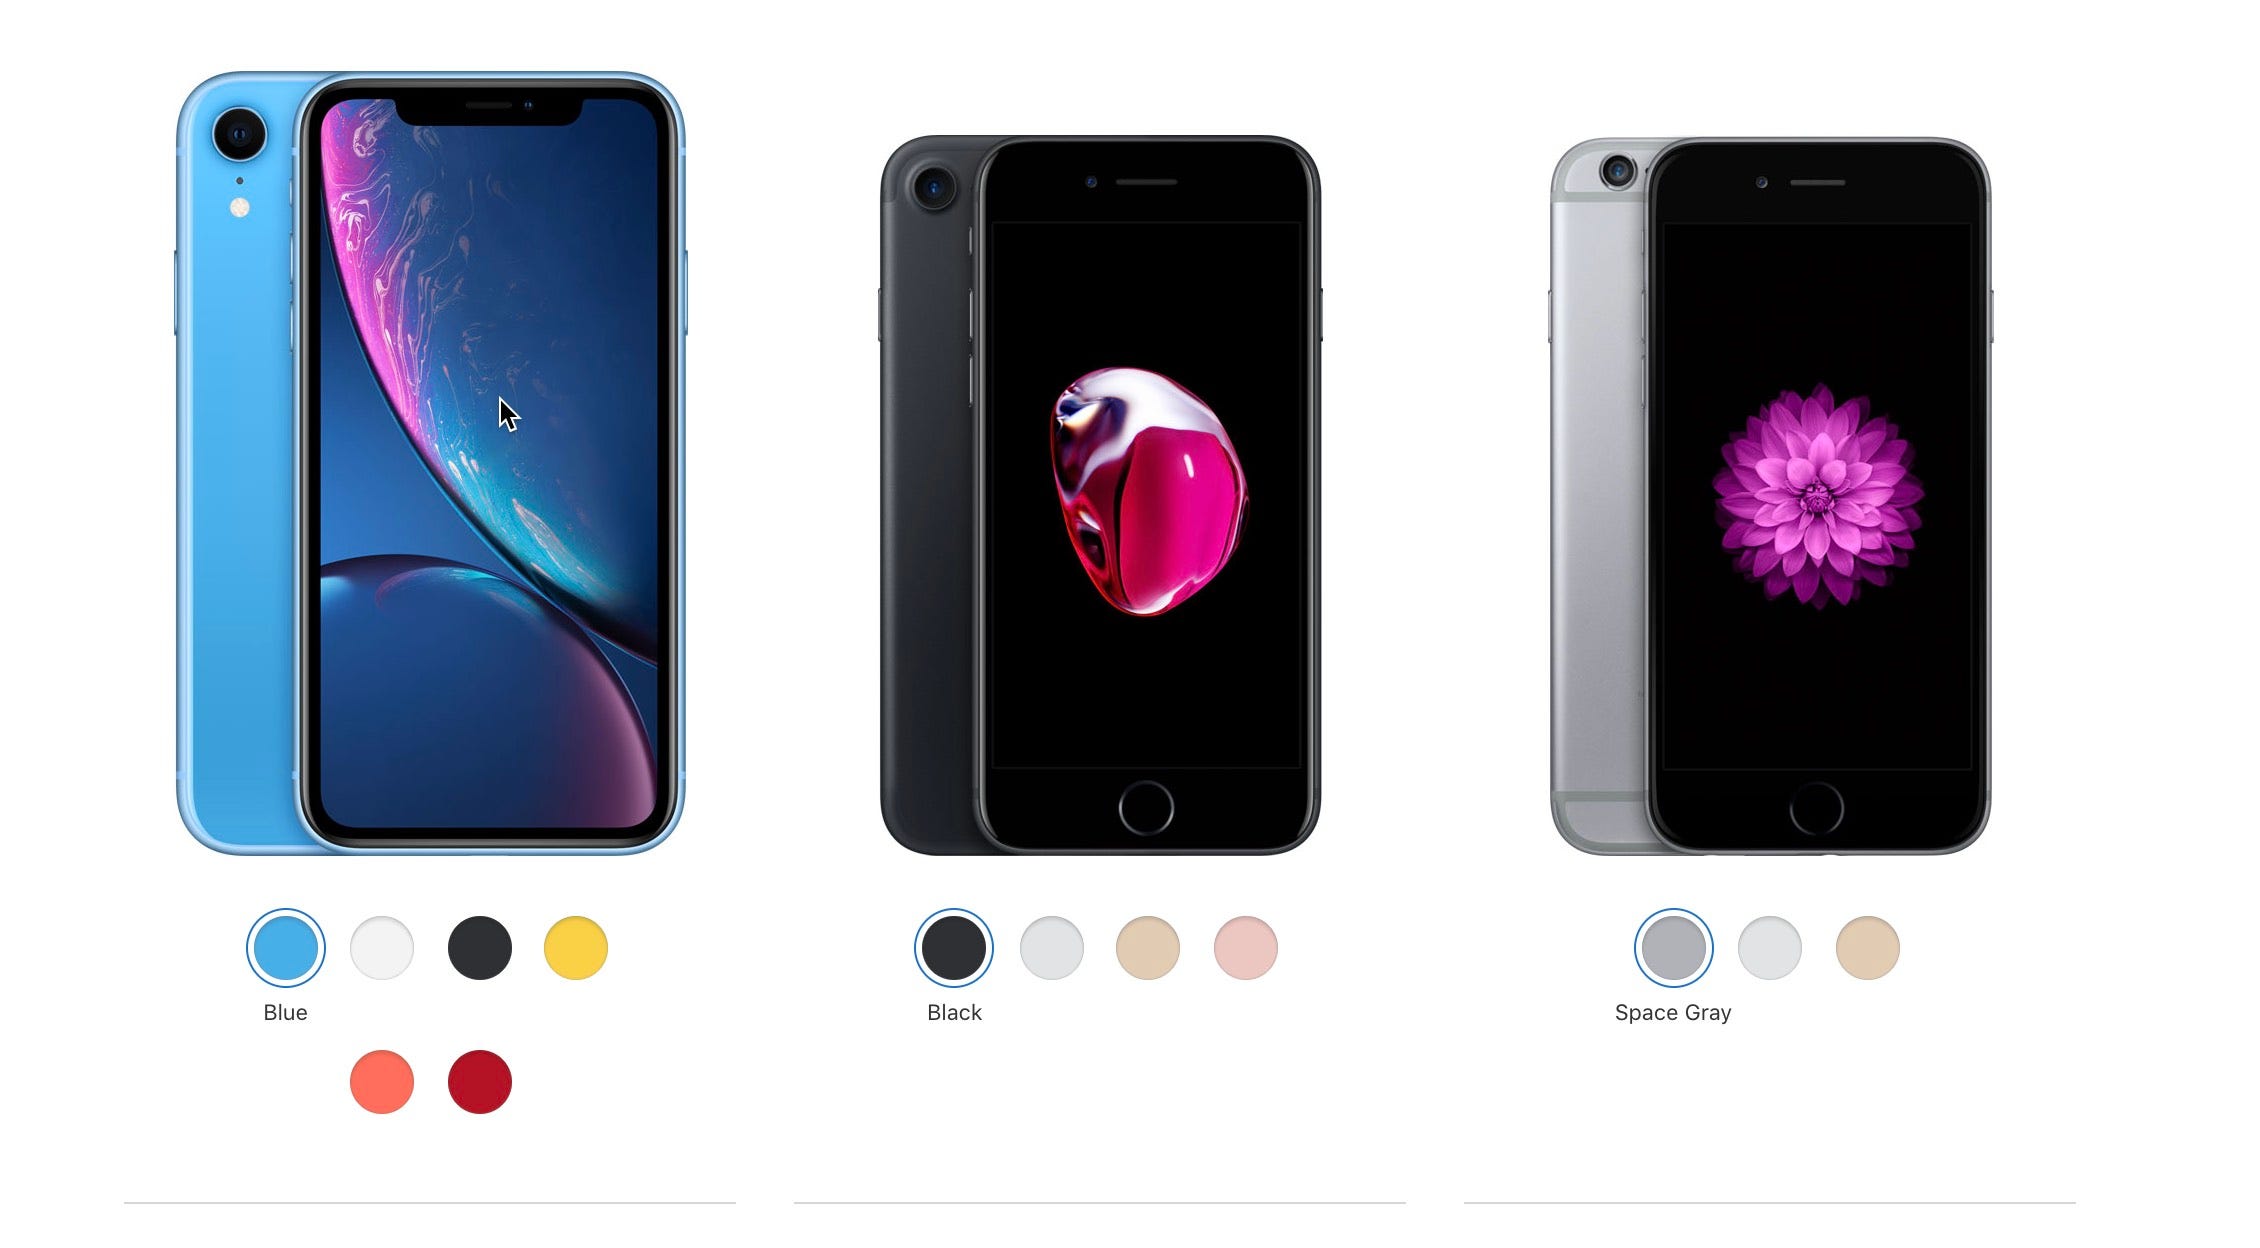 Upgrading from iPhone 6: Apple's or 8 a better budget option?